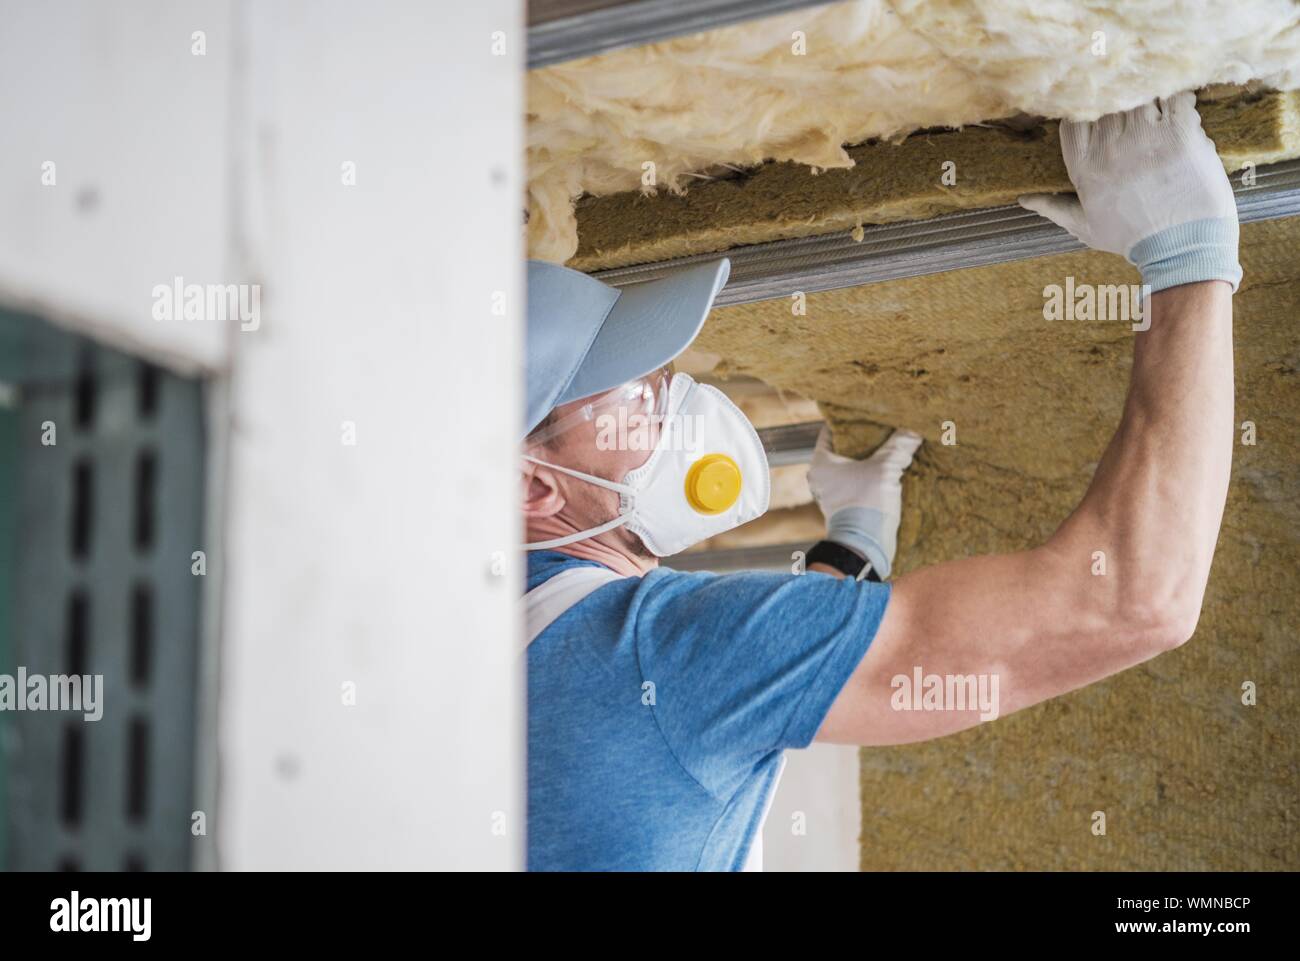 Manual Worker Working At Home Stock Photo